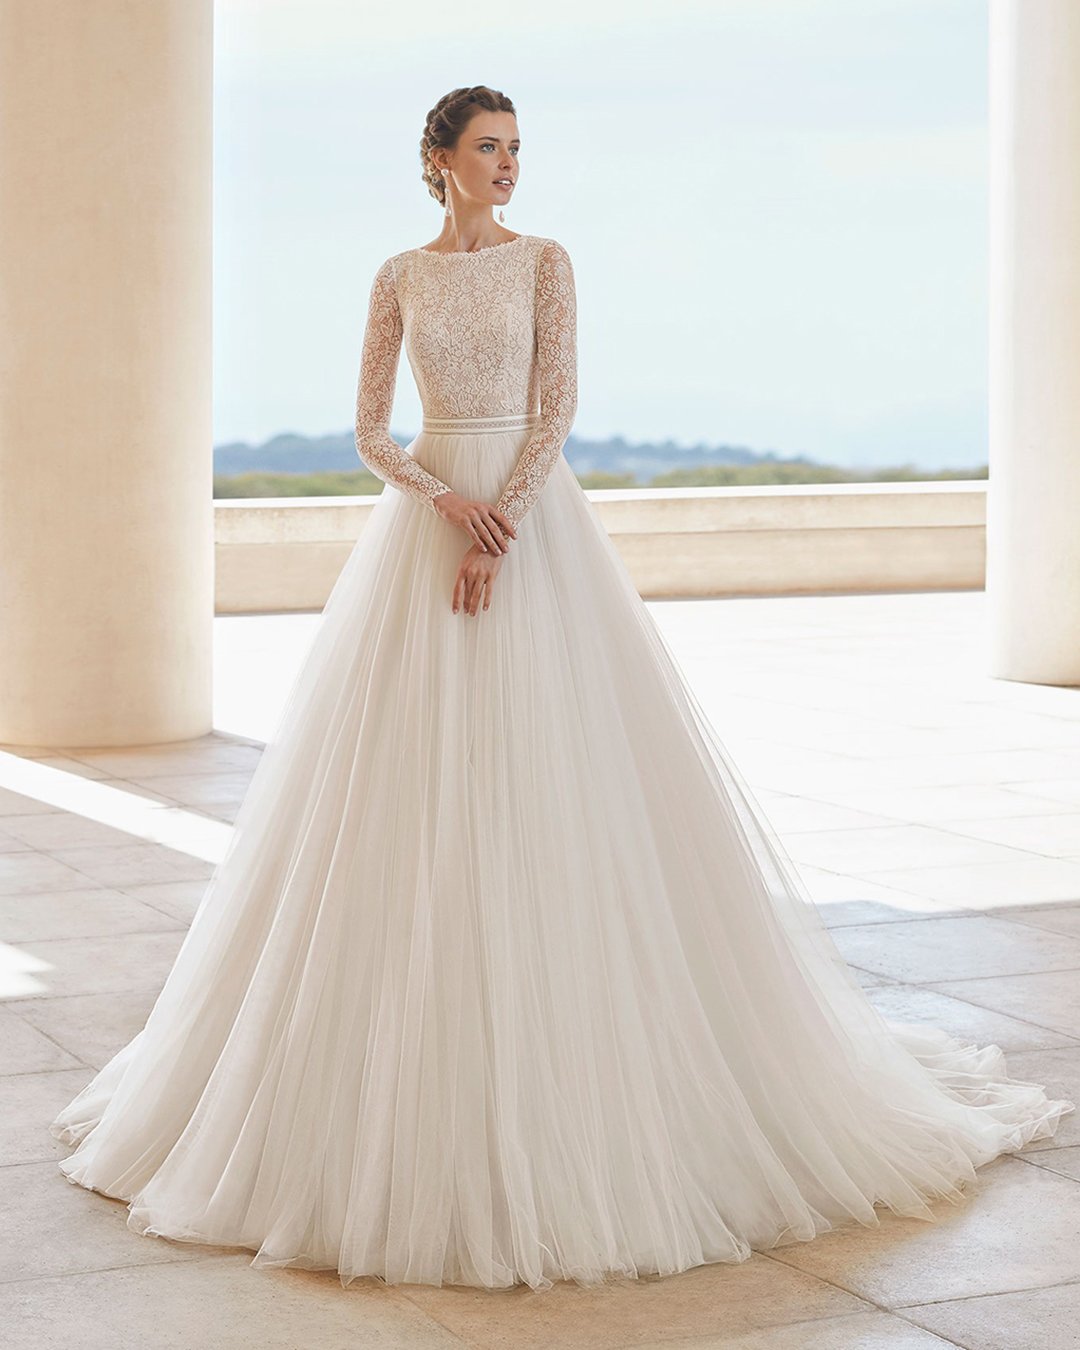 Long Sleeve Off The Shoulder Sheath Wedding Dress With Lace Bodice And  Train | Kleinfeld Bridal